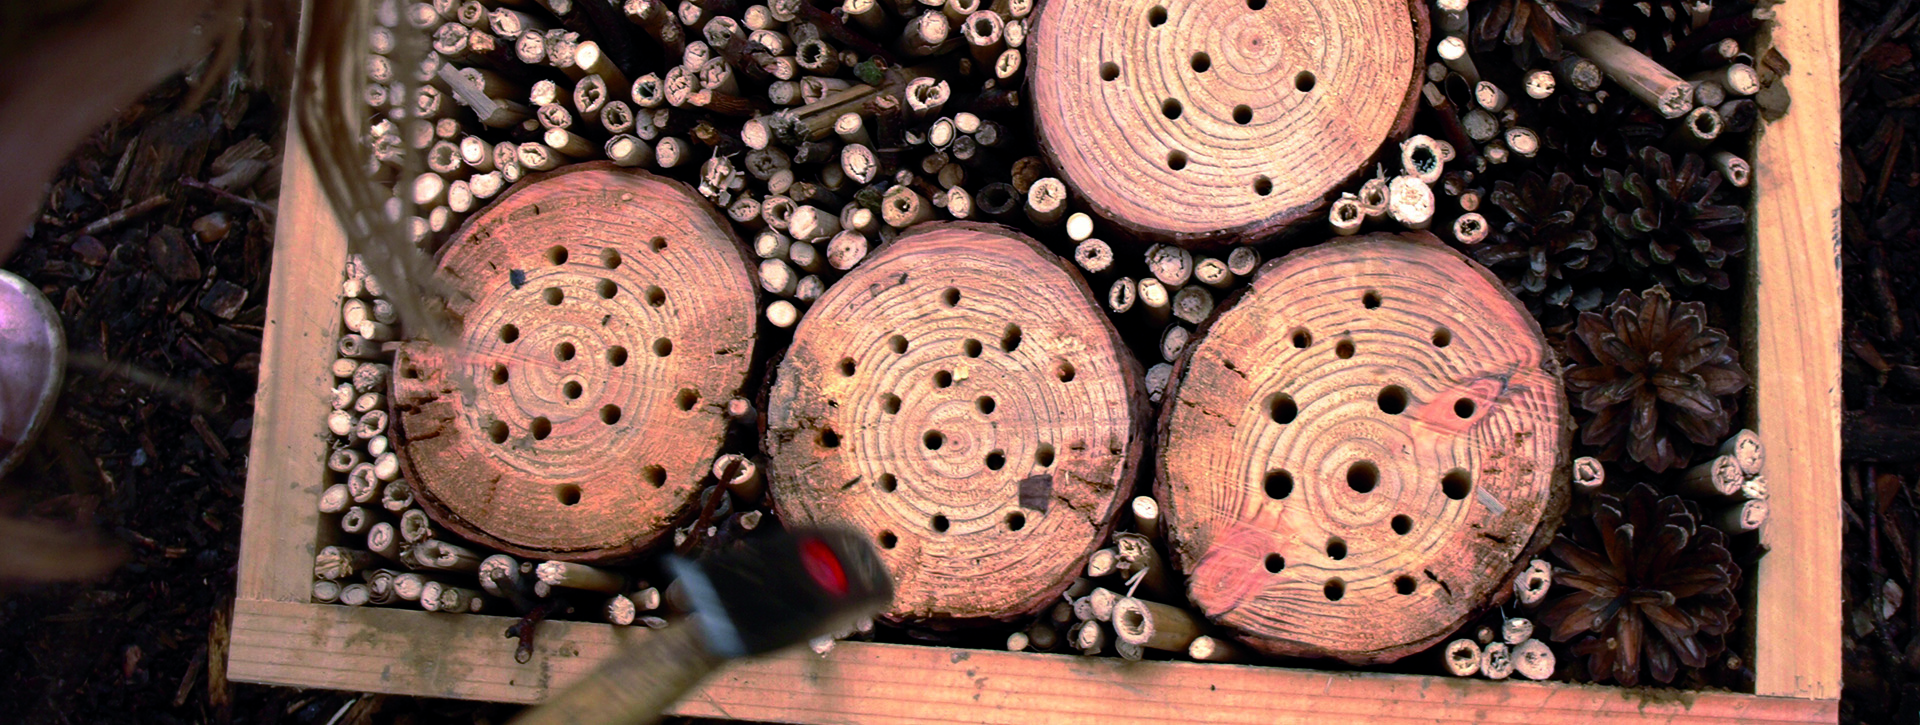 Detailed view of an insect hotel